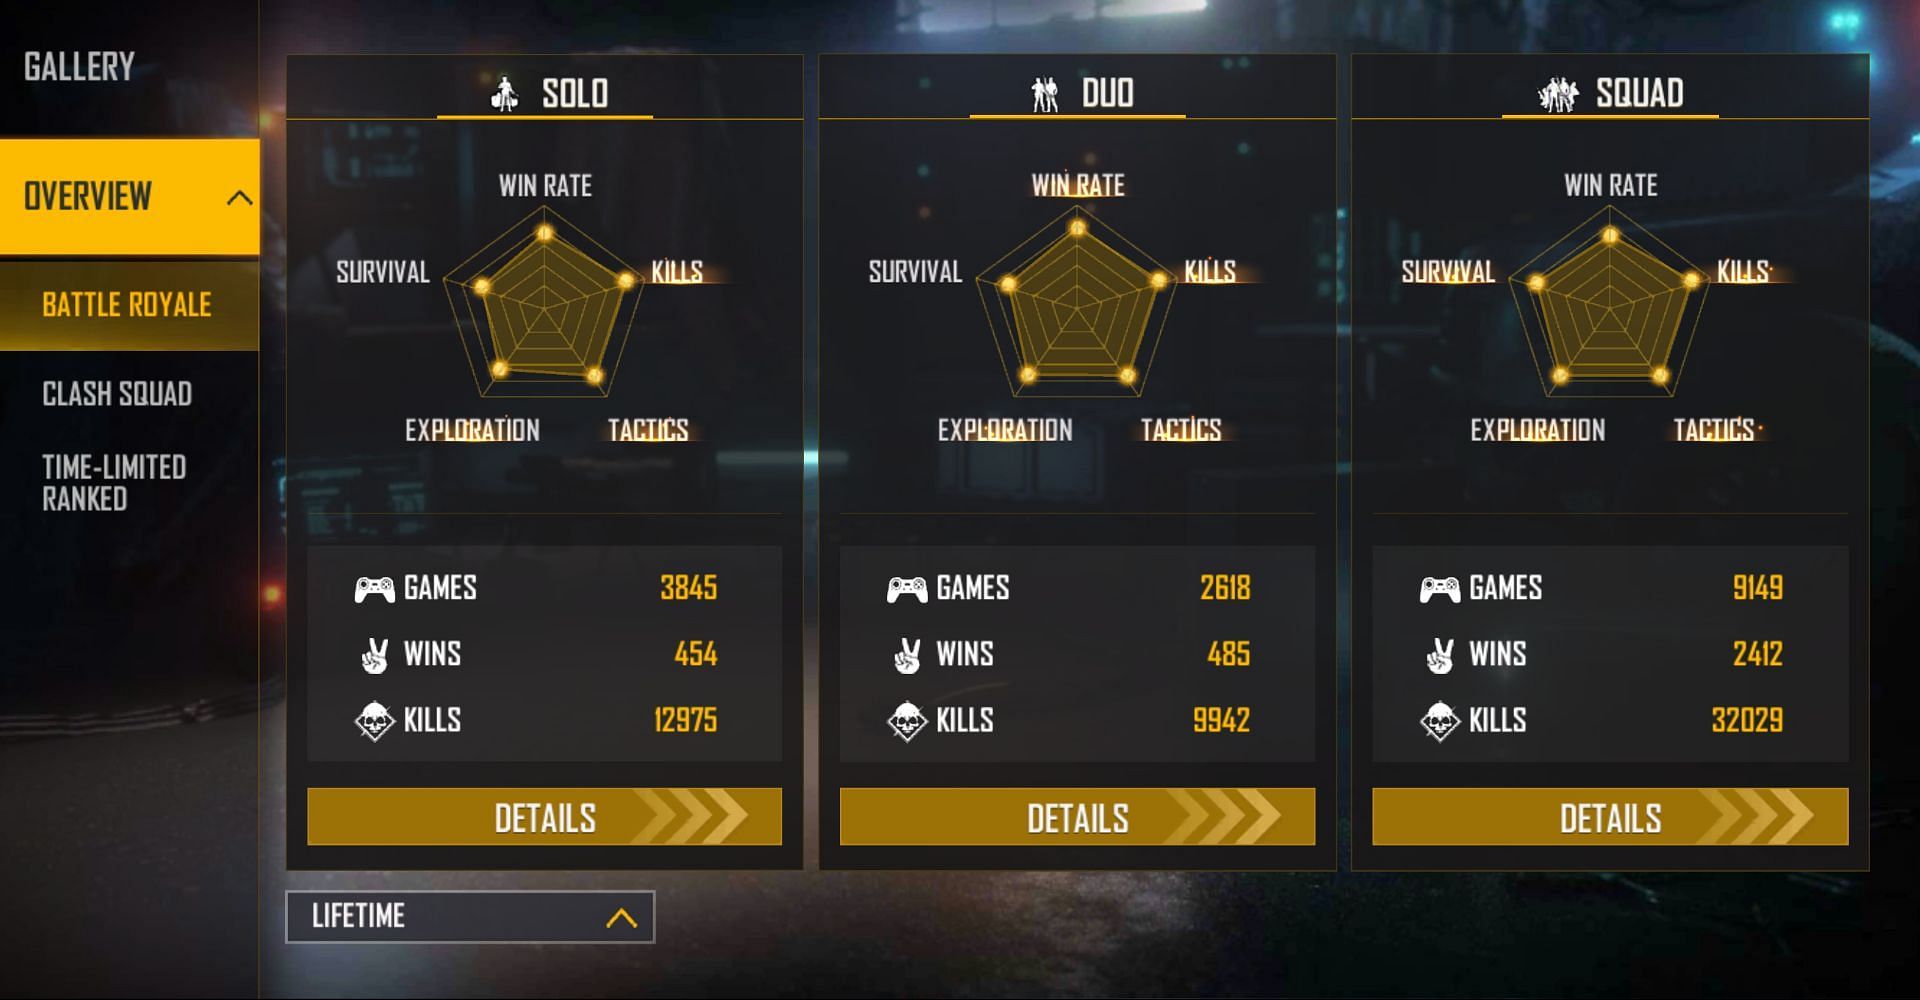 MrStiven Tc has 32k frags in squad matches (Image via Garena)